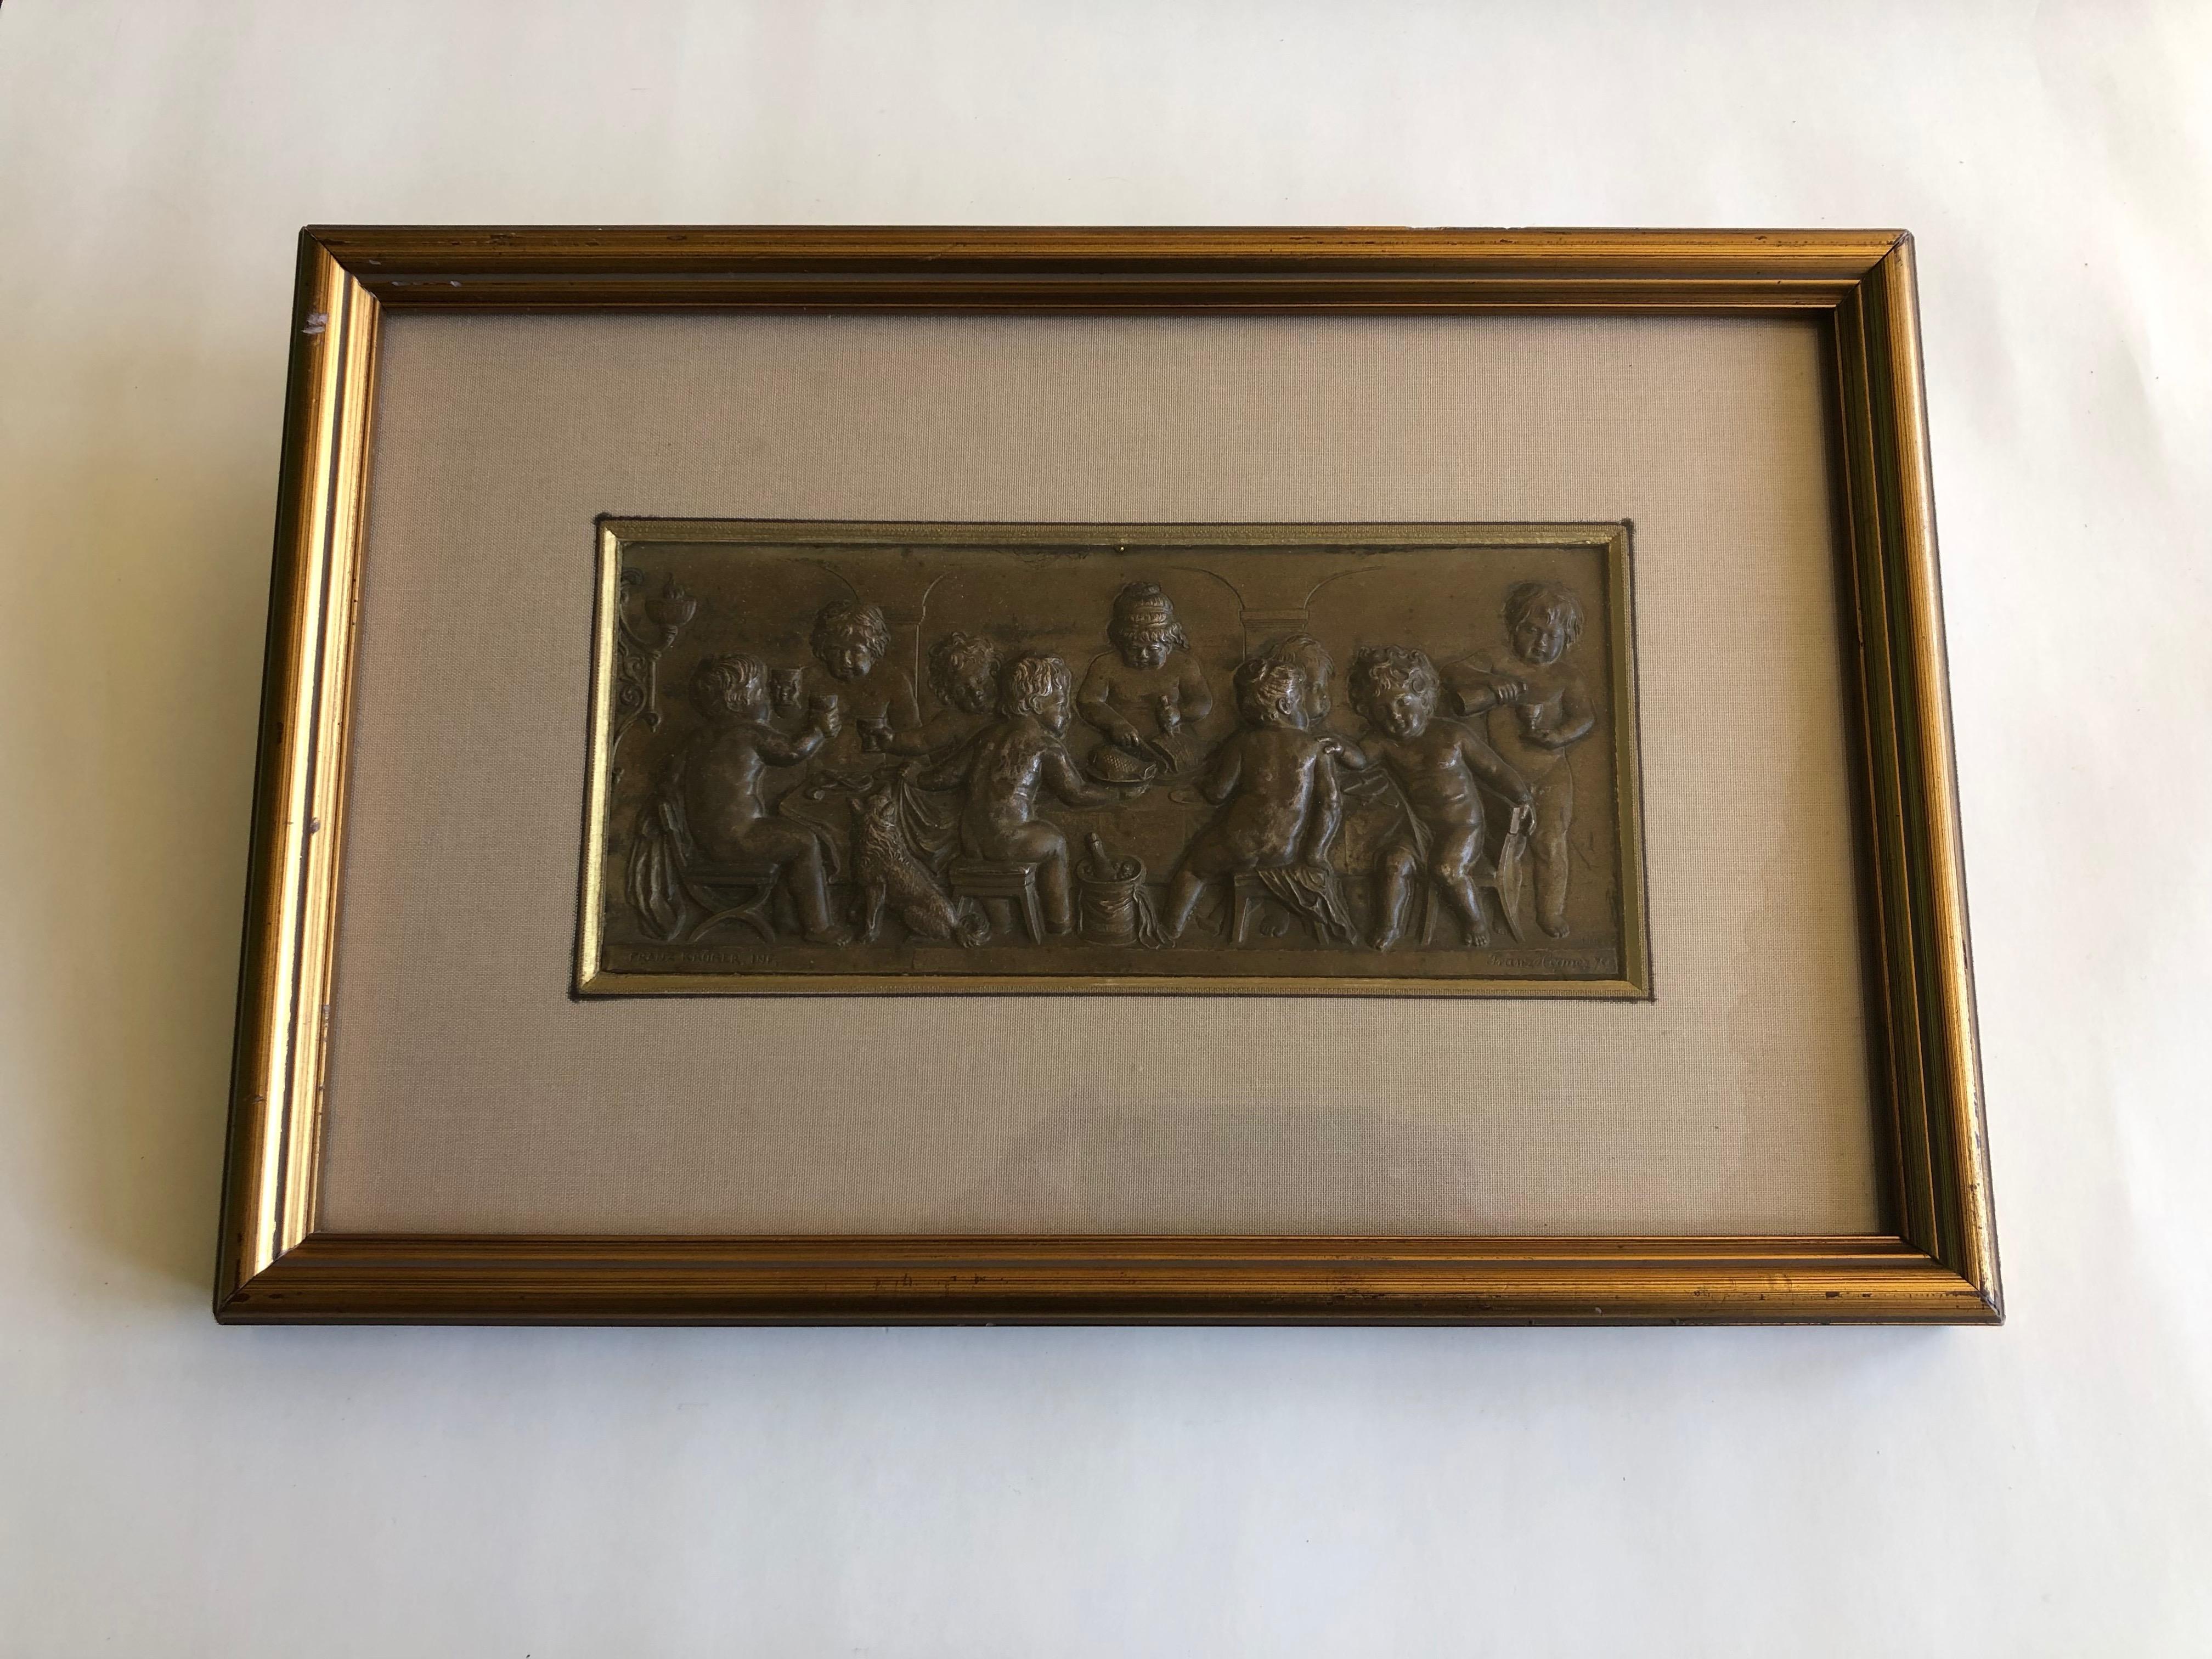 Framed Embossed Bronze Of 9 Cherubs Dining With A Dog, Signed And Dated 1902 - Sculpture by Franz Krüger